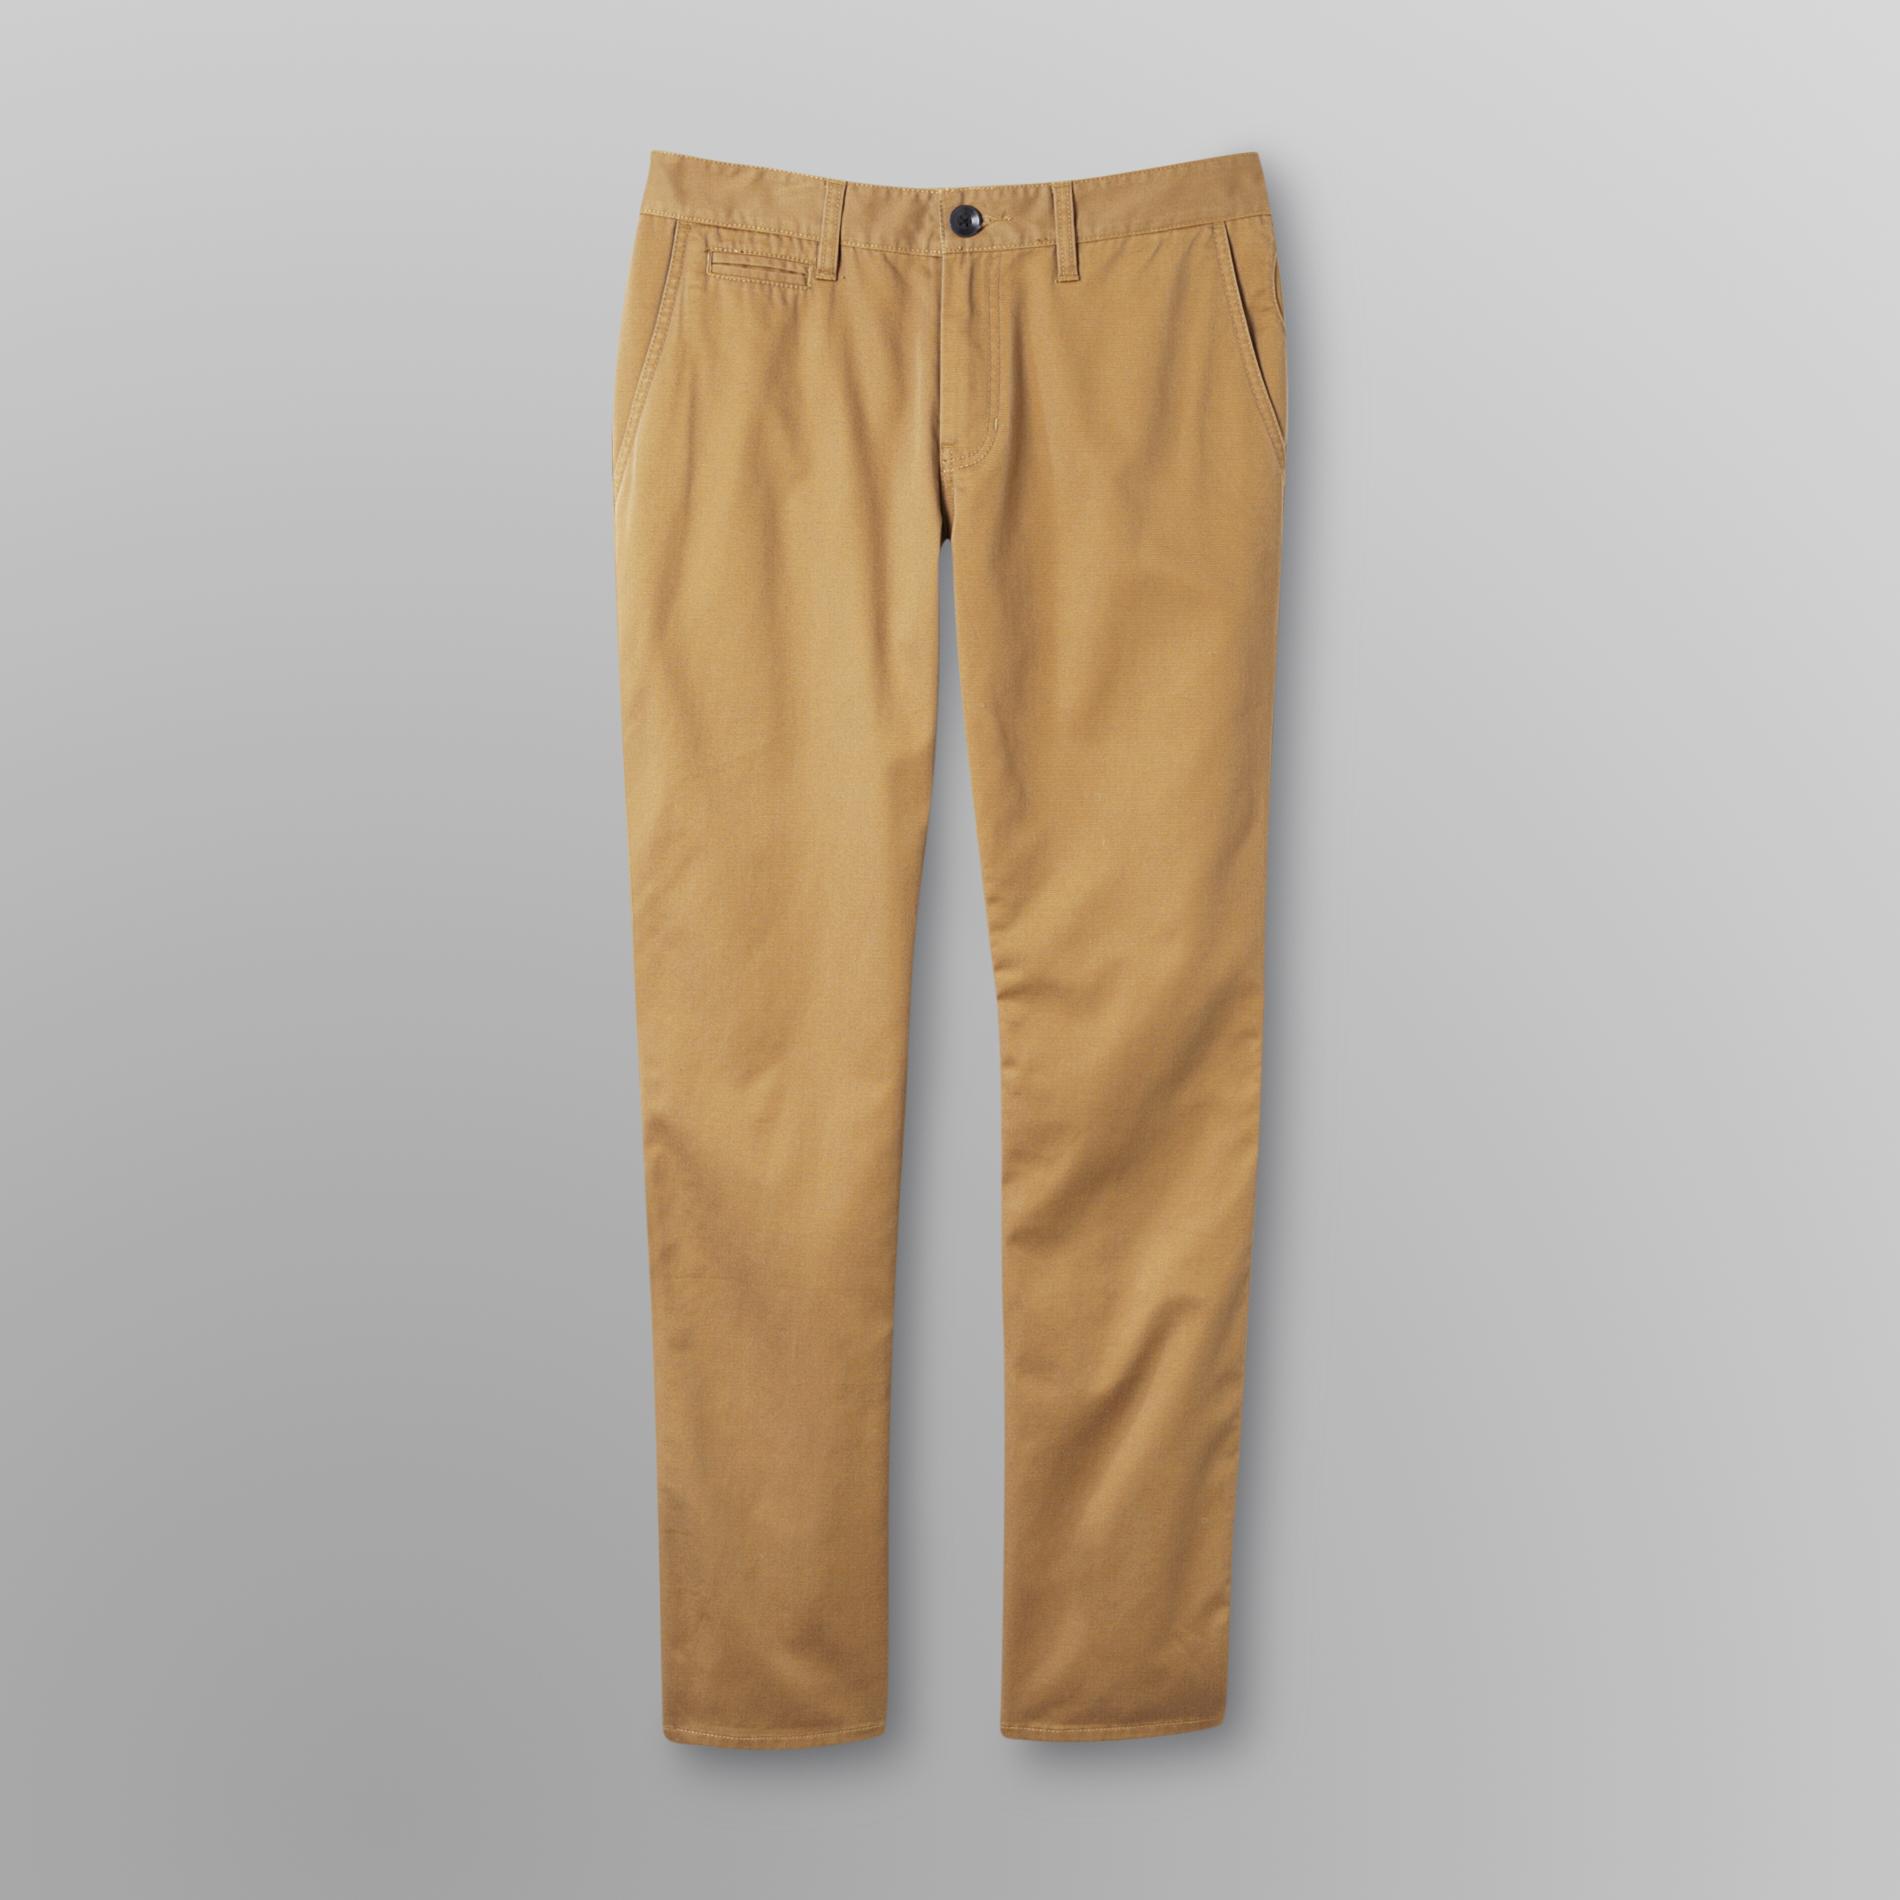 Amplify Young Men's Twill Pants